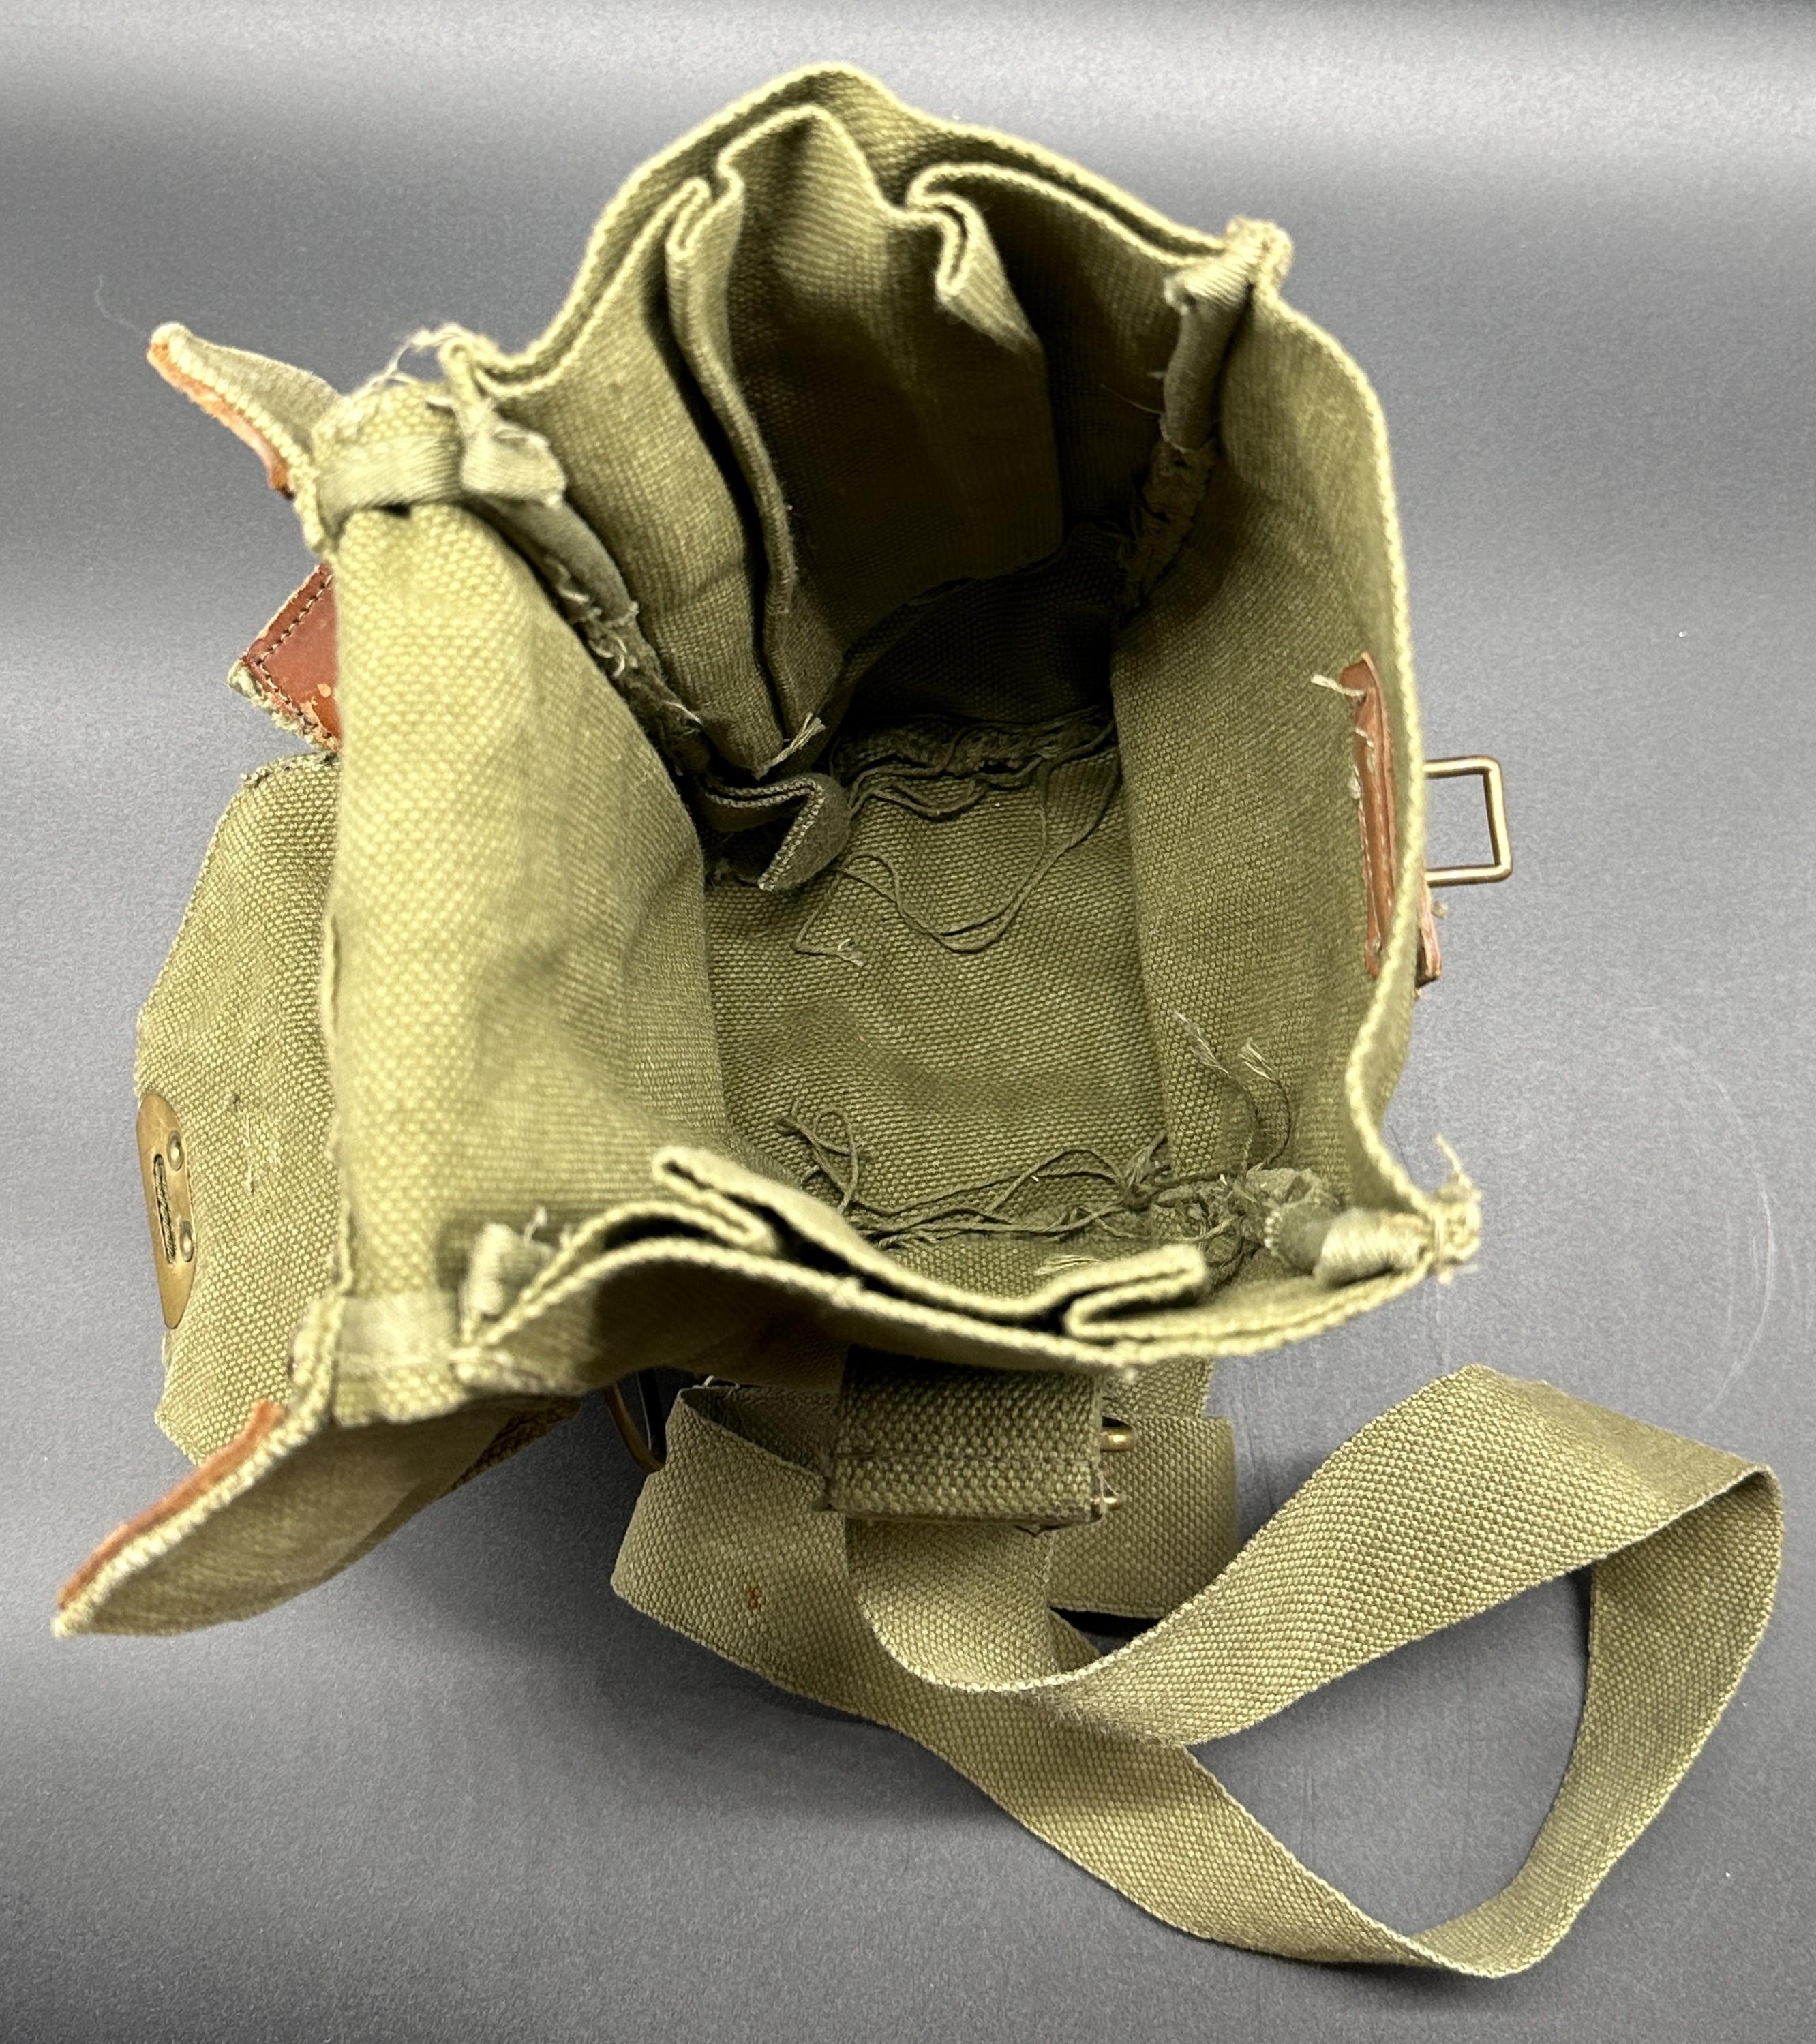 Vintage Gas Mask and Canvas Bag